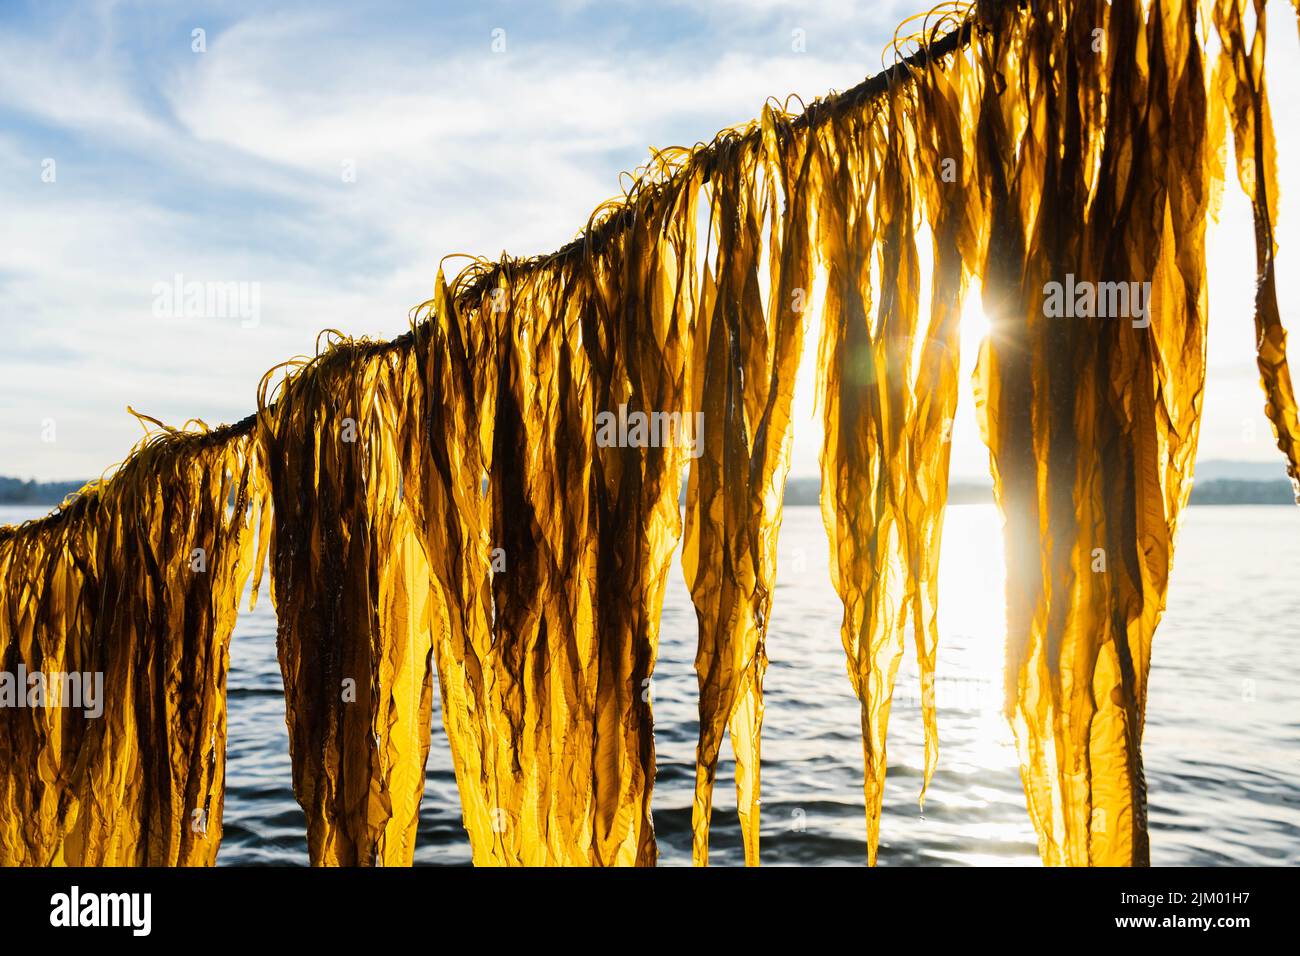 Fresh Alaria Seaweed being Harvested from the Pacific Ocean, Dripping in the Bright Sunset against a Blue Sky Stock Photo